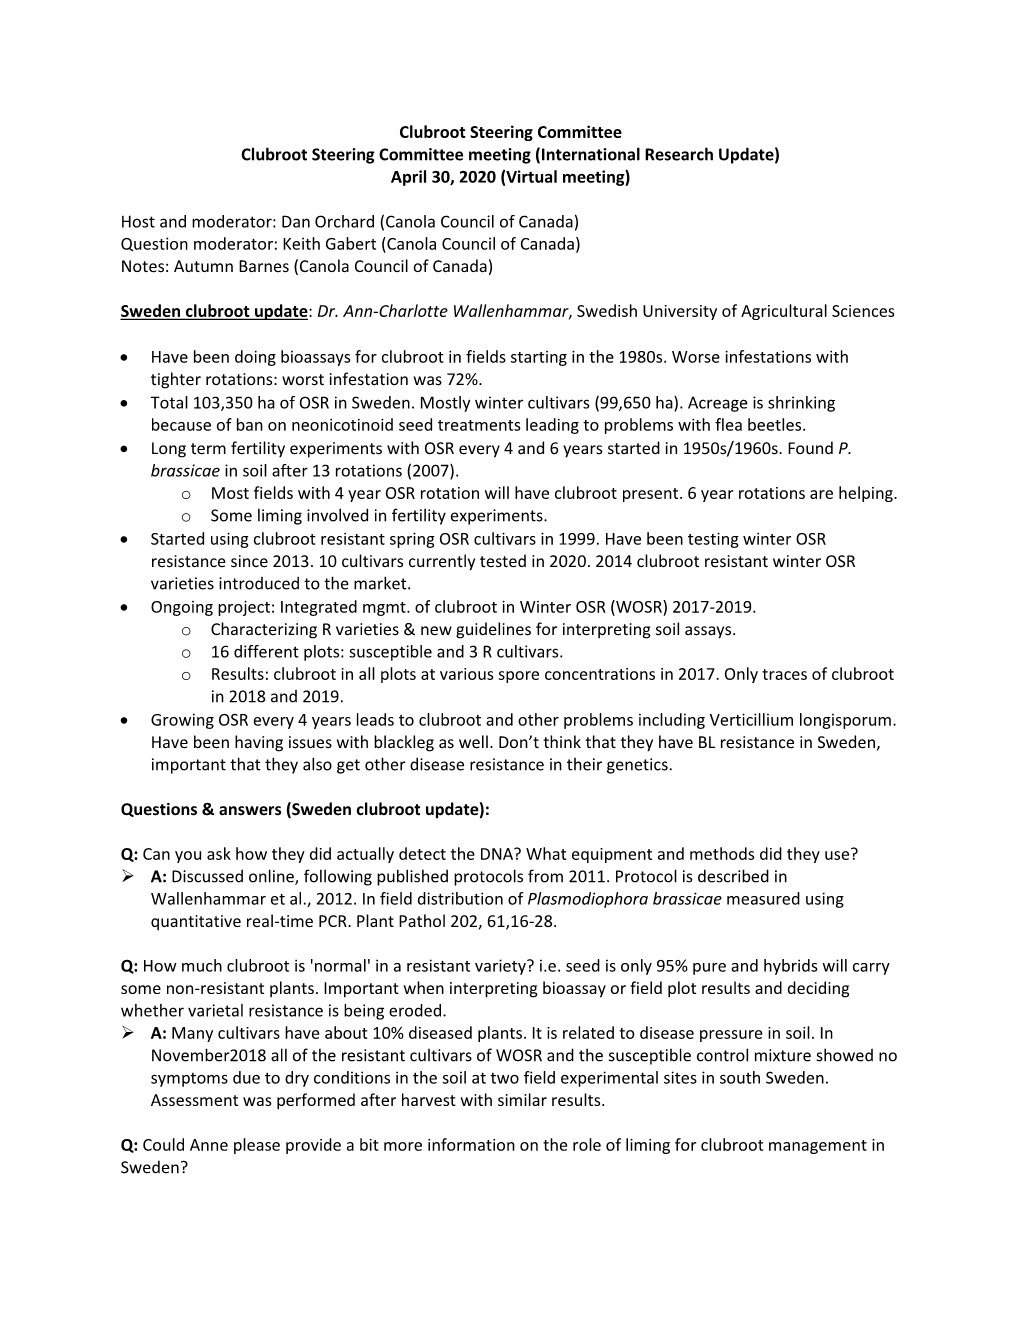 Clubroot Steering Committee Meeting Notes with Q&A